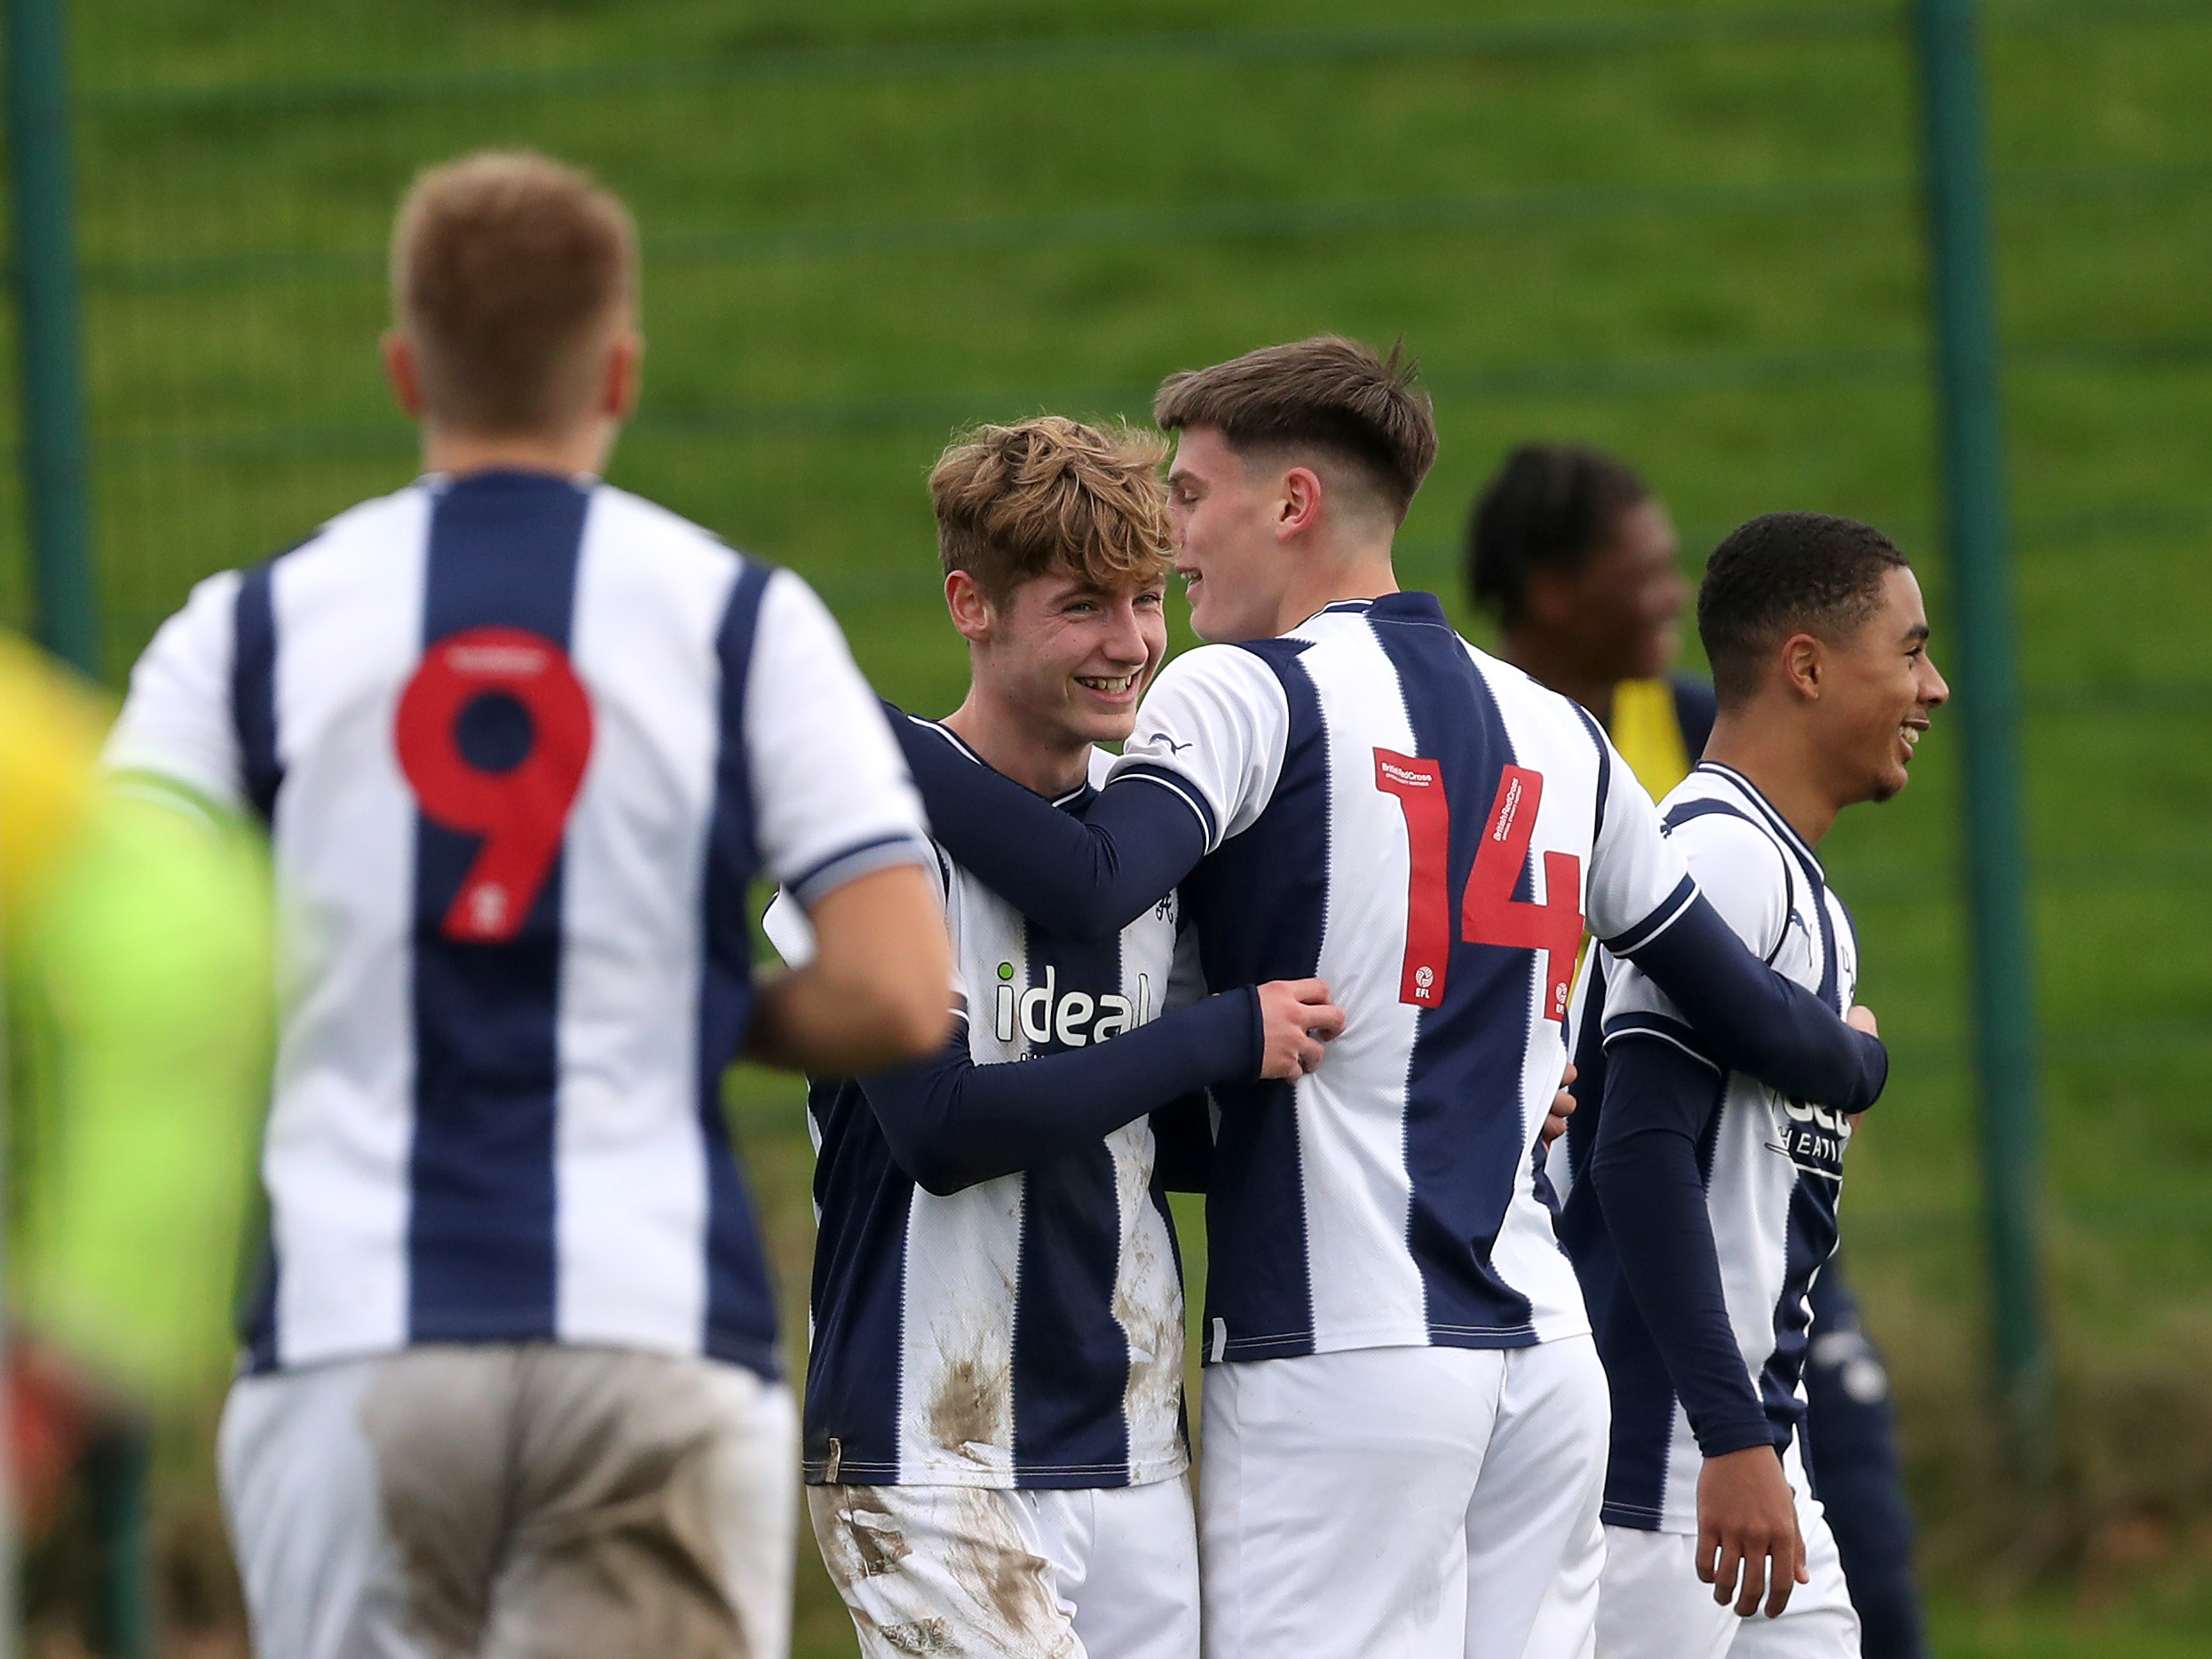 Albion U18 players celebrate after scoring a goal